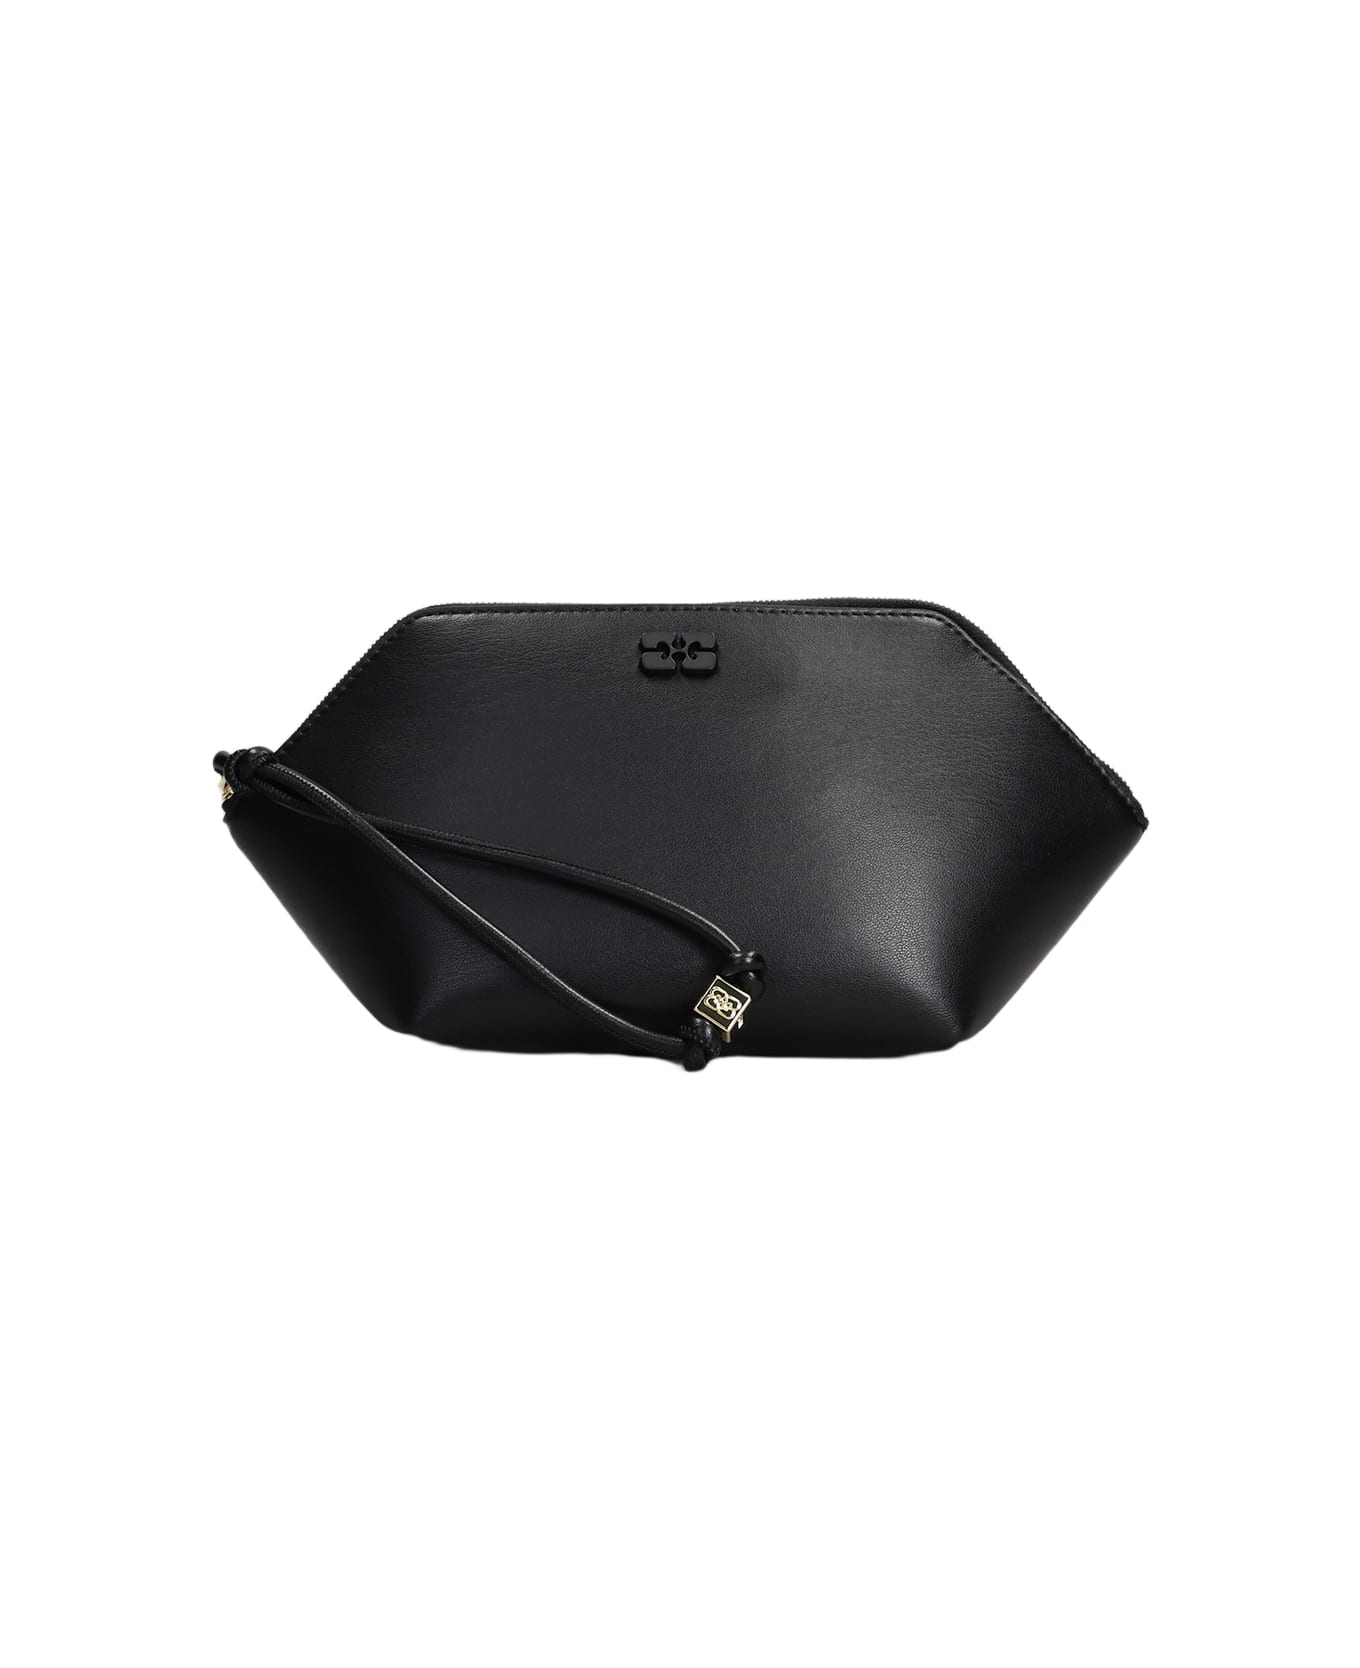 Ganni Bou Zipped Clutch In Black Leather - black クラッチバッグ